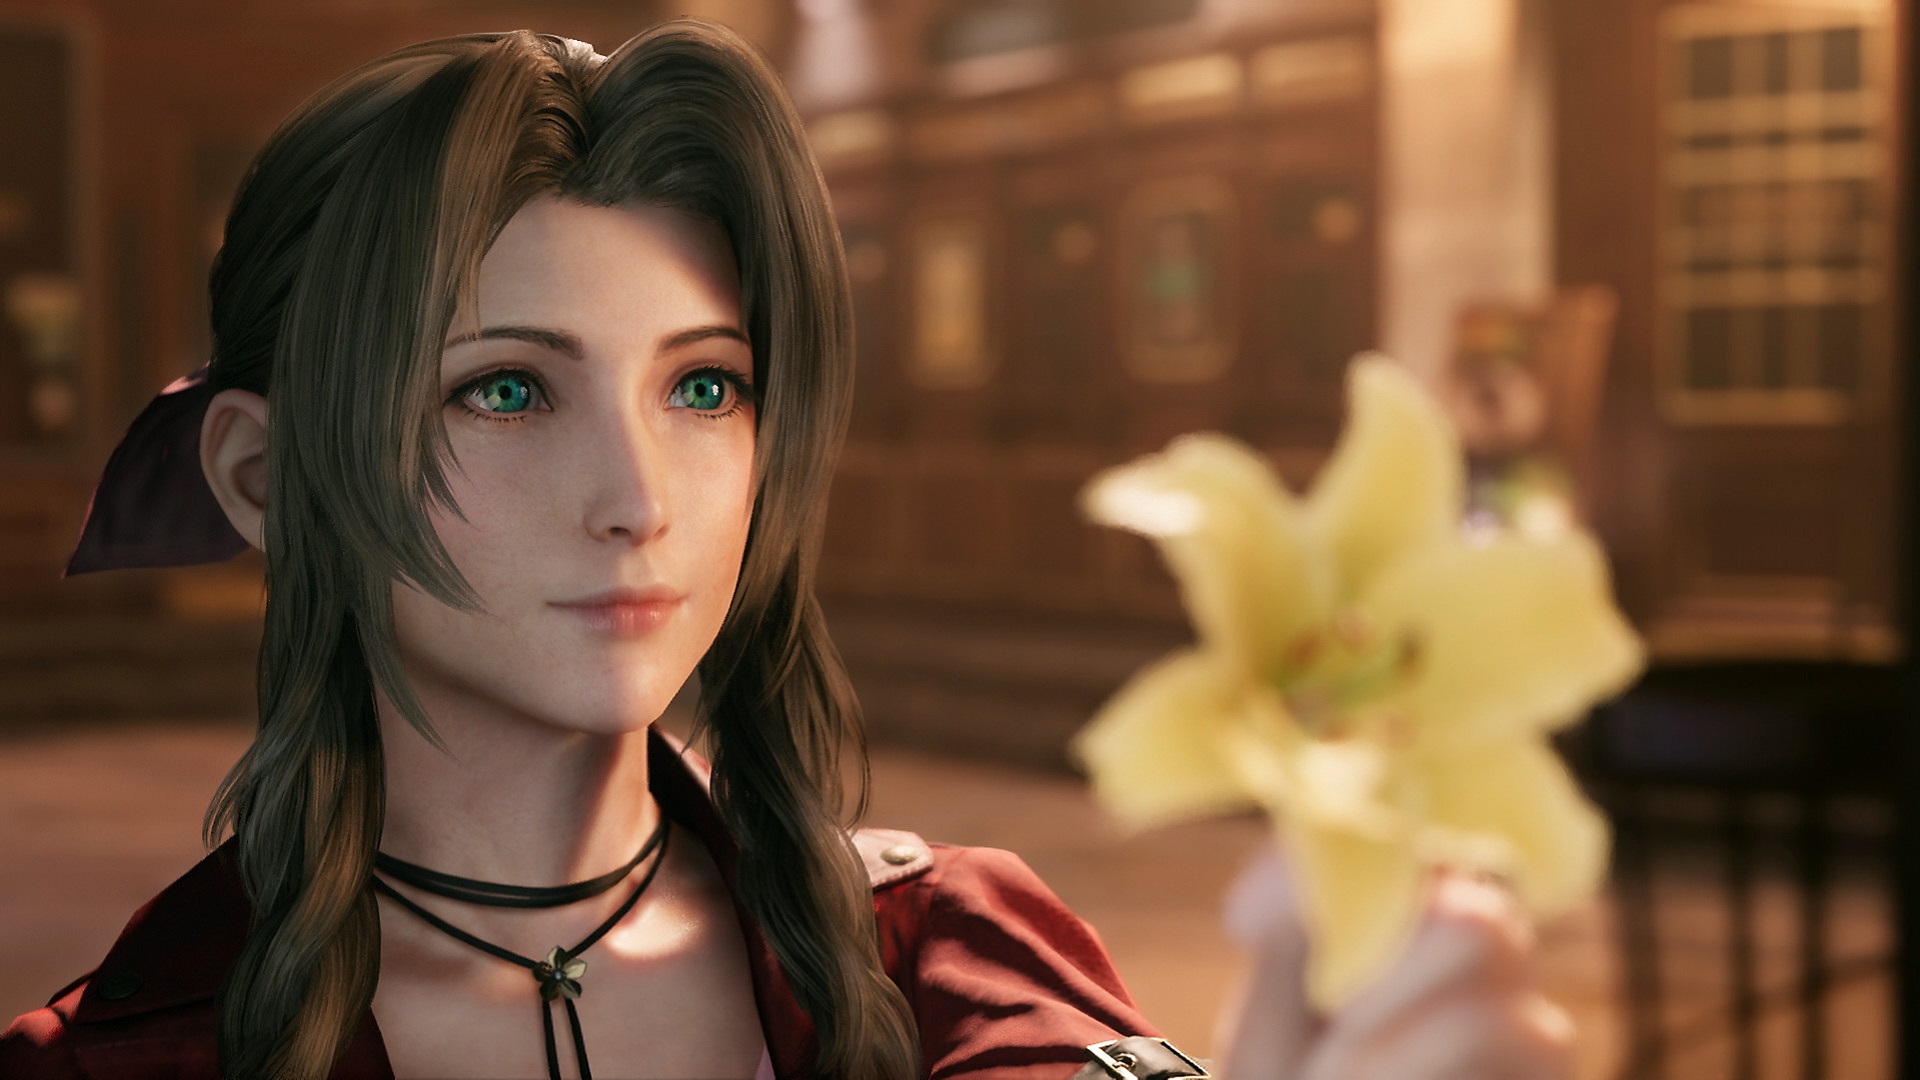 General 1920x1080 Final Fantasy Final Fantasy VII: Remake Aerith Gainsborough women video games Square Enix video game girls video game characters